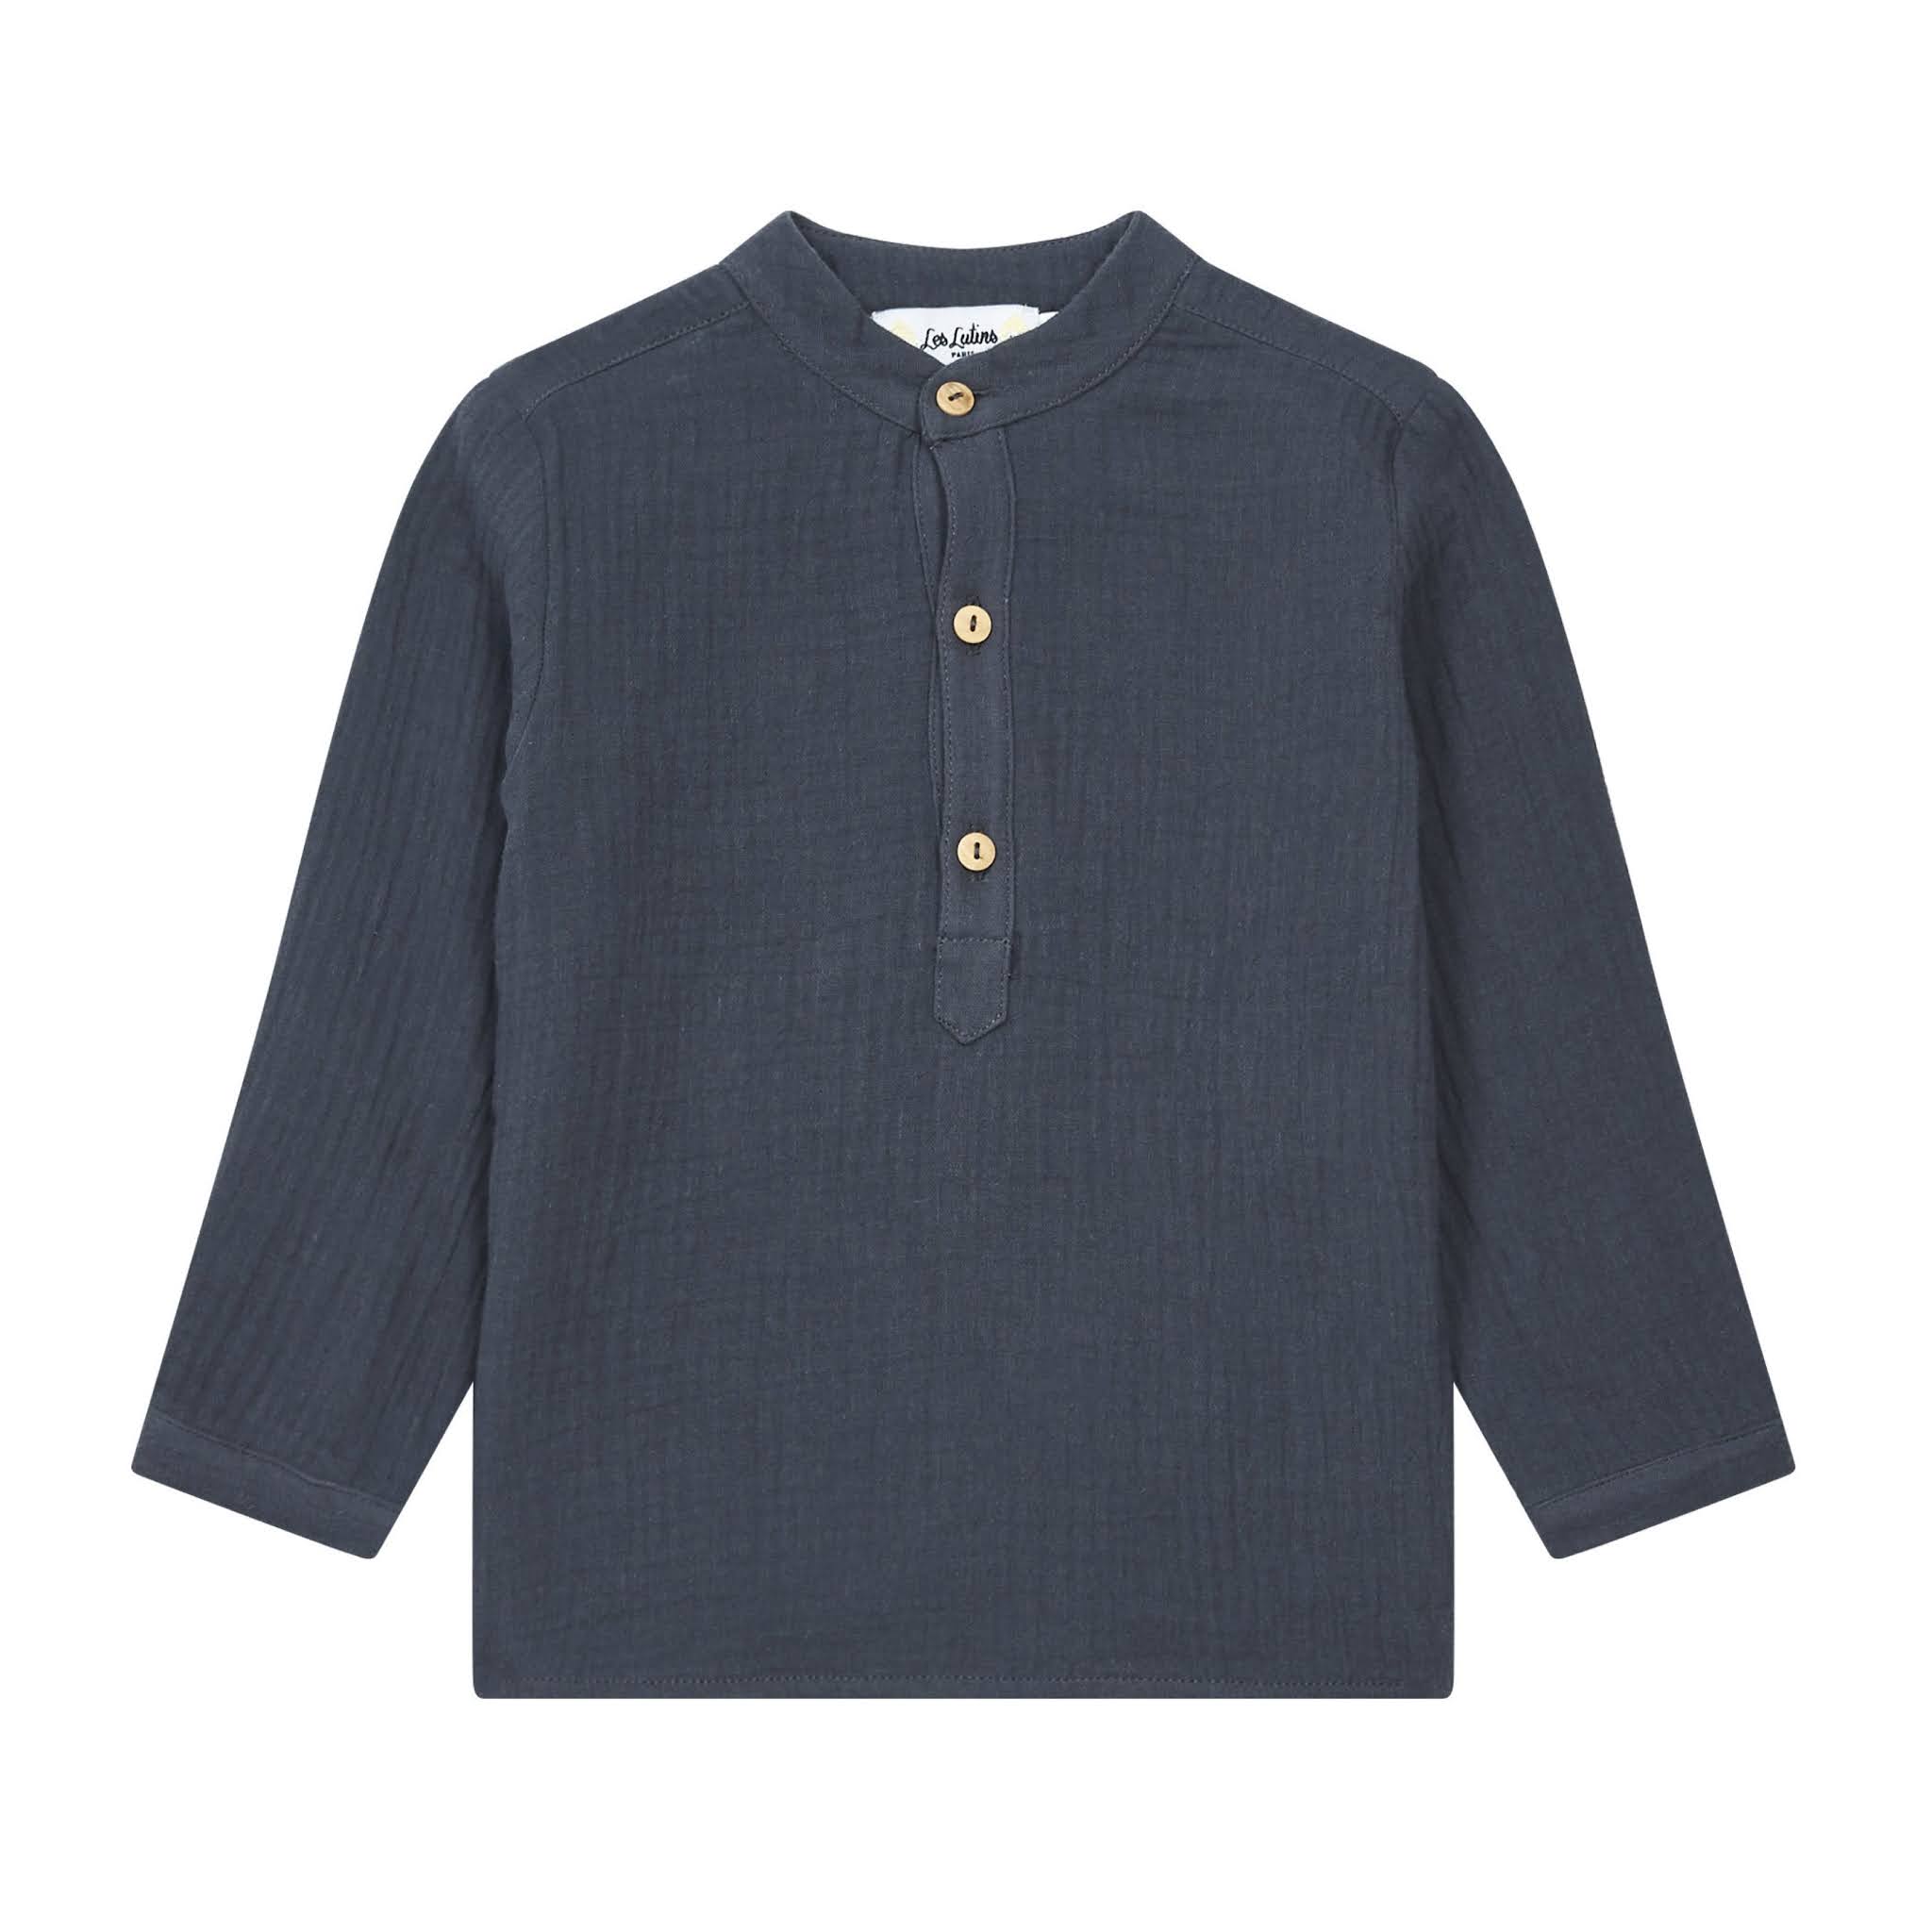 Boys Midnight Blue Cotton Shirt from Les Lutins